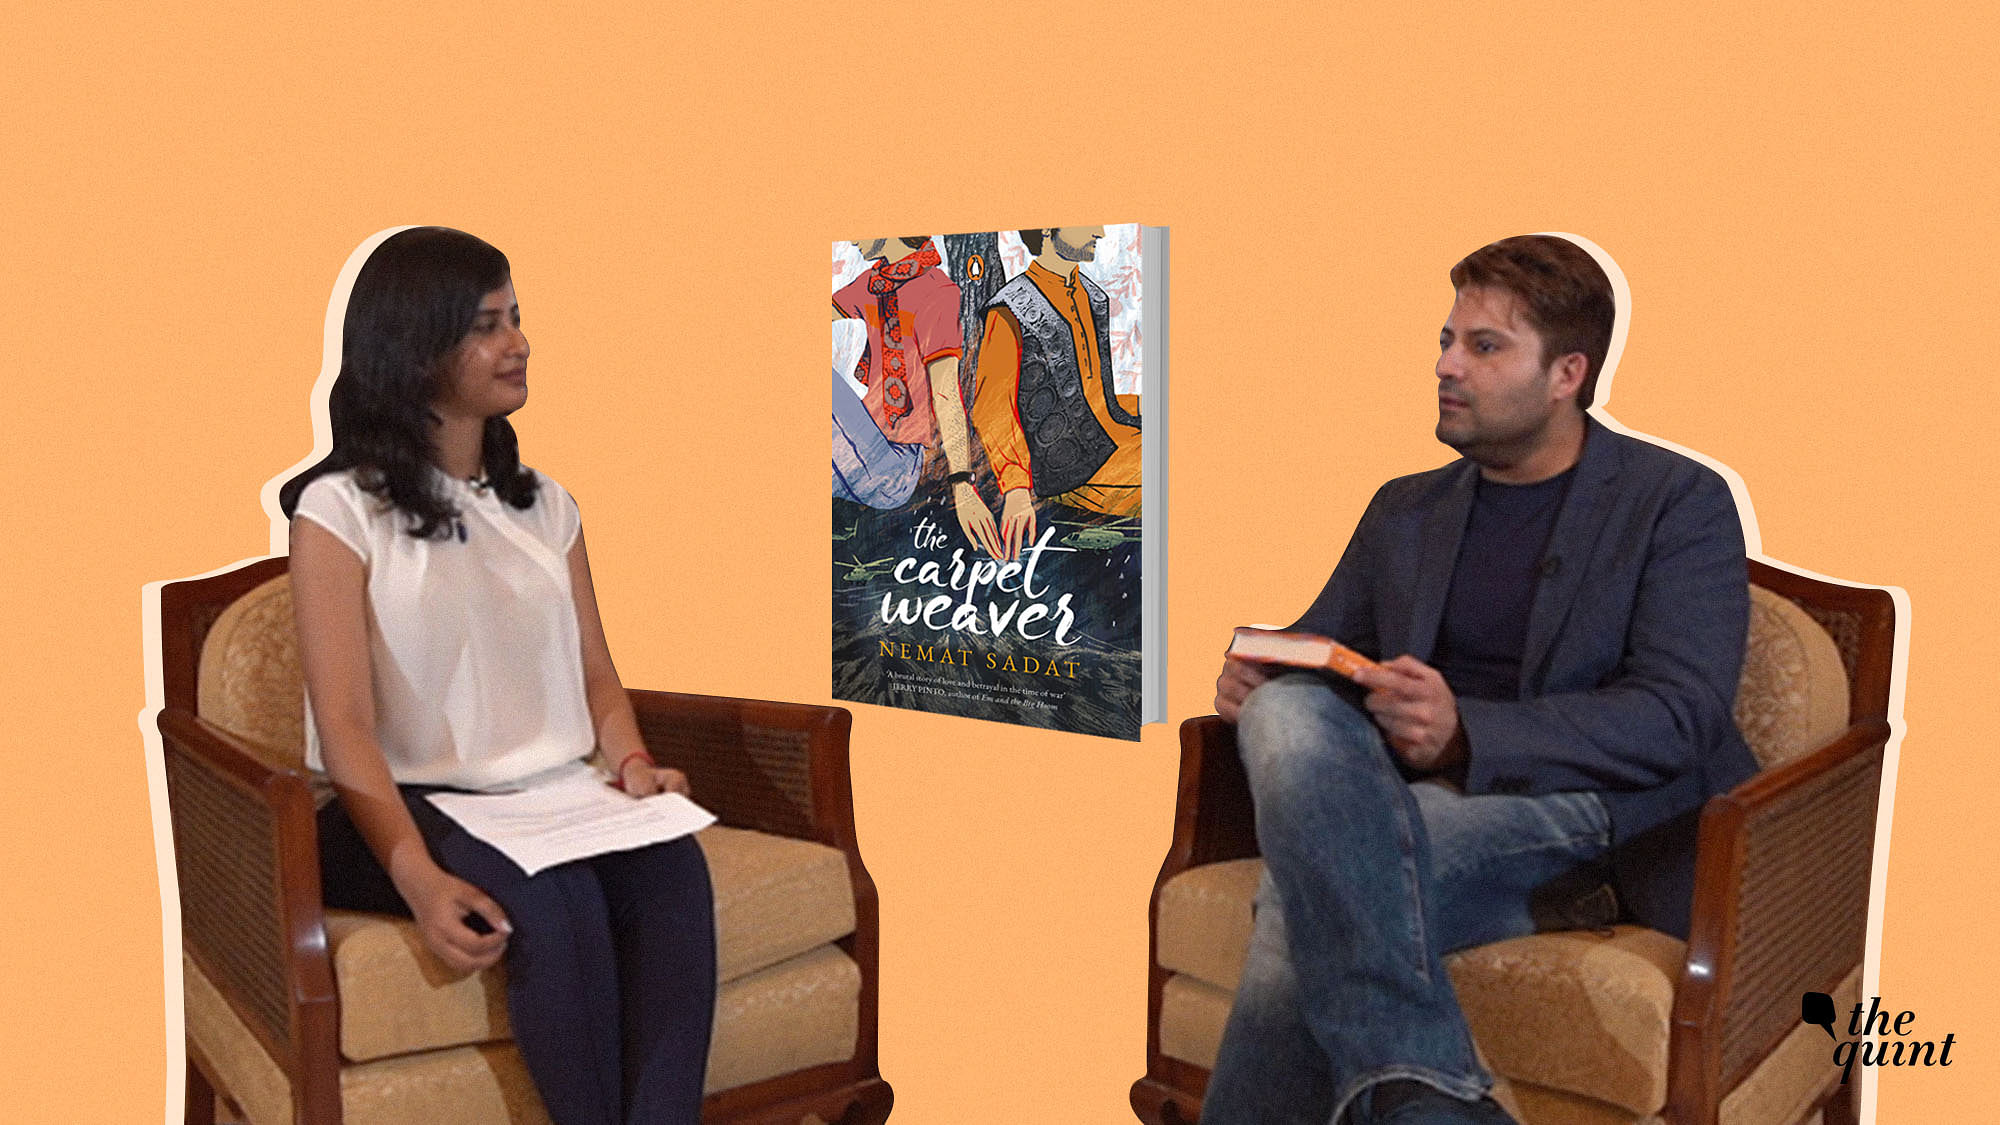 The Quint’s Indira Basu (left) with author-activist Nemat Sadat (right) along with the cover of the book by Sadat (centre). Image used for representational purposes.